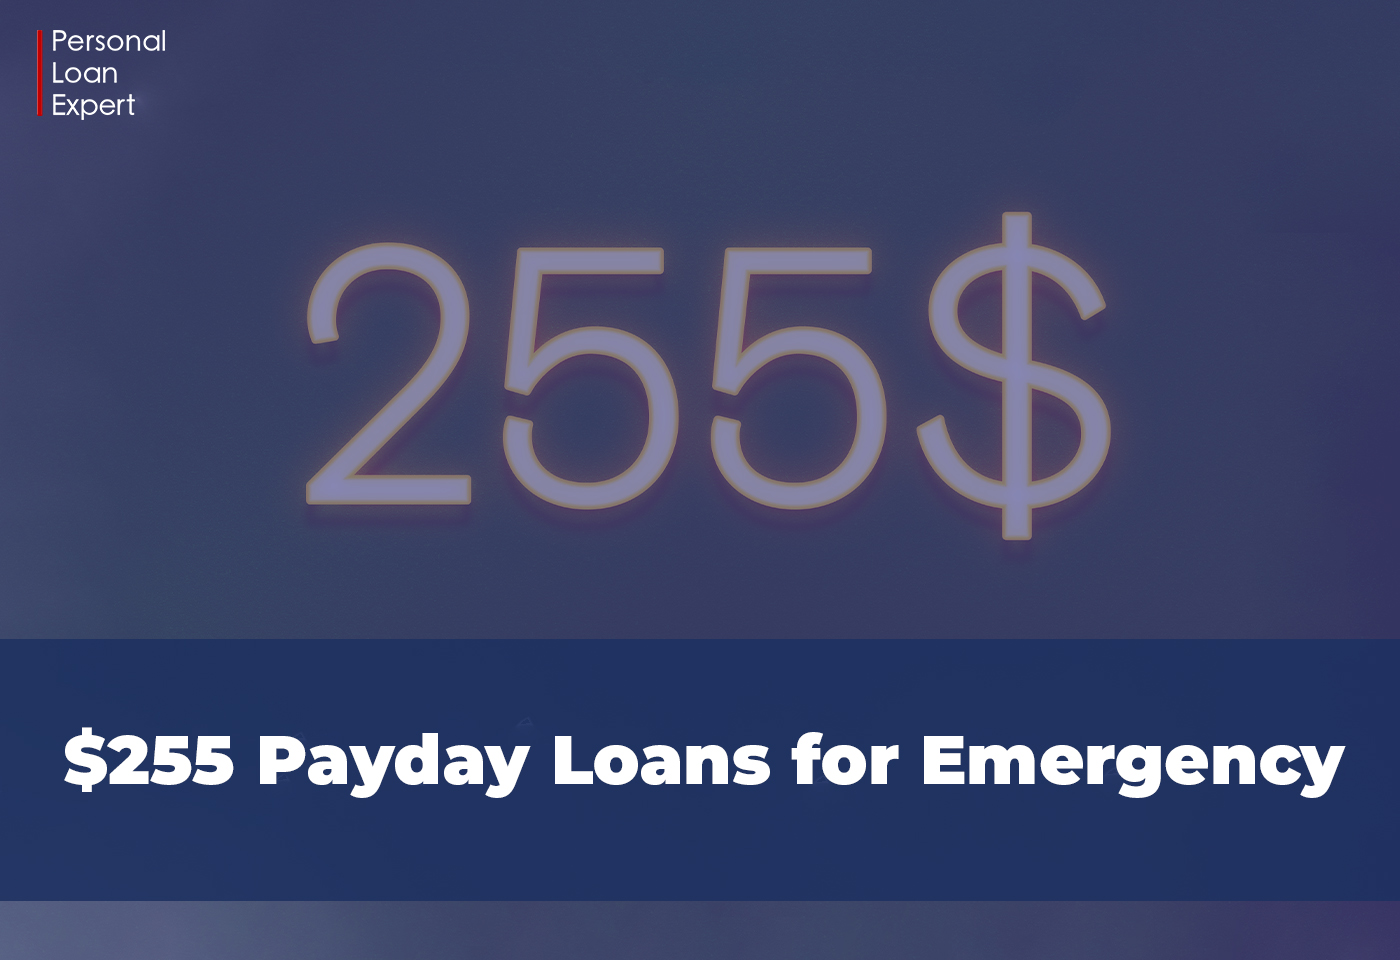 5 Payday Loans for Emergency